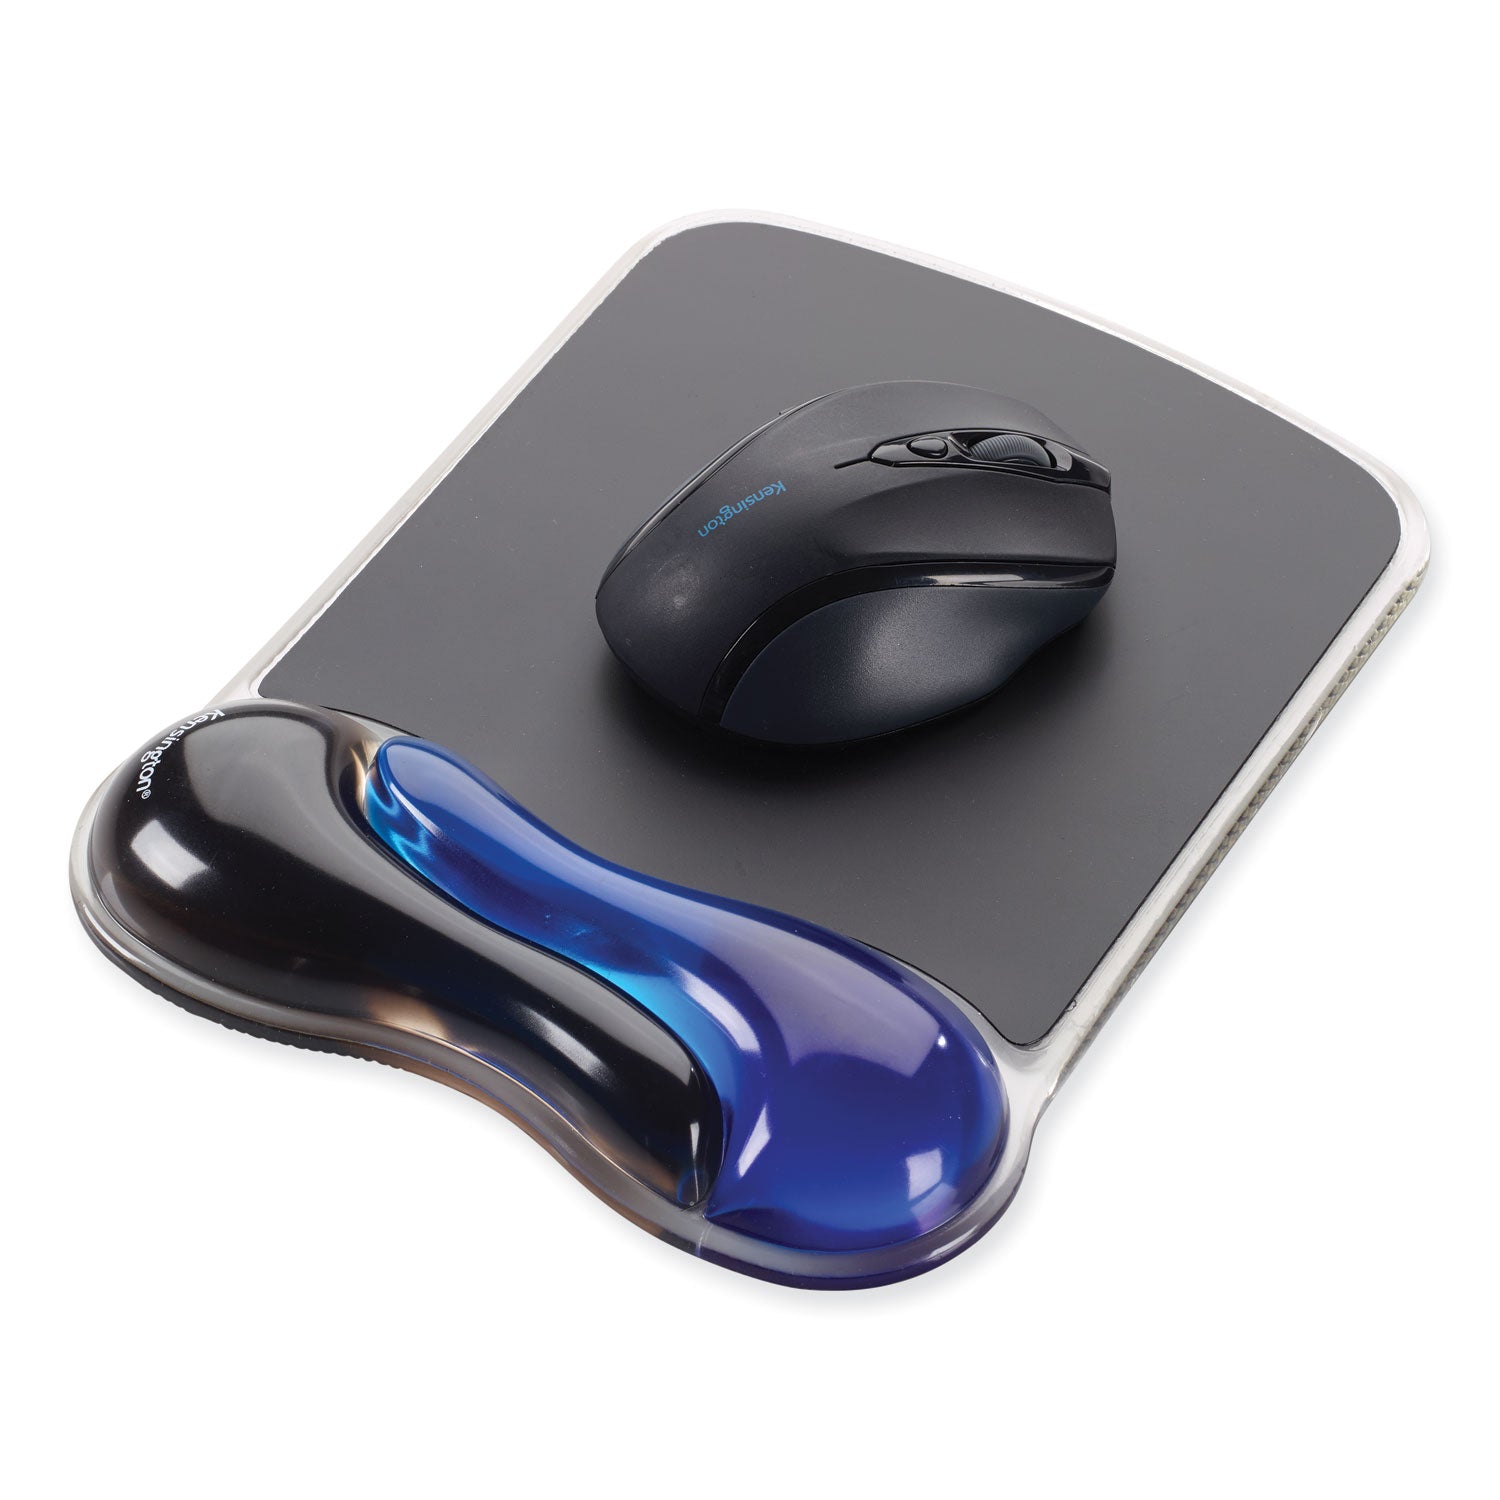 duo-gel-wave-mouse-pad-with-wrist-rest-937-x-13-blue_kmw62401 - 3